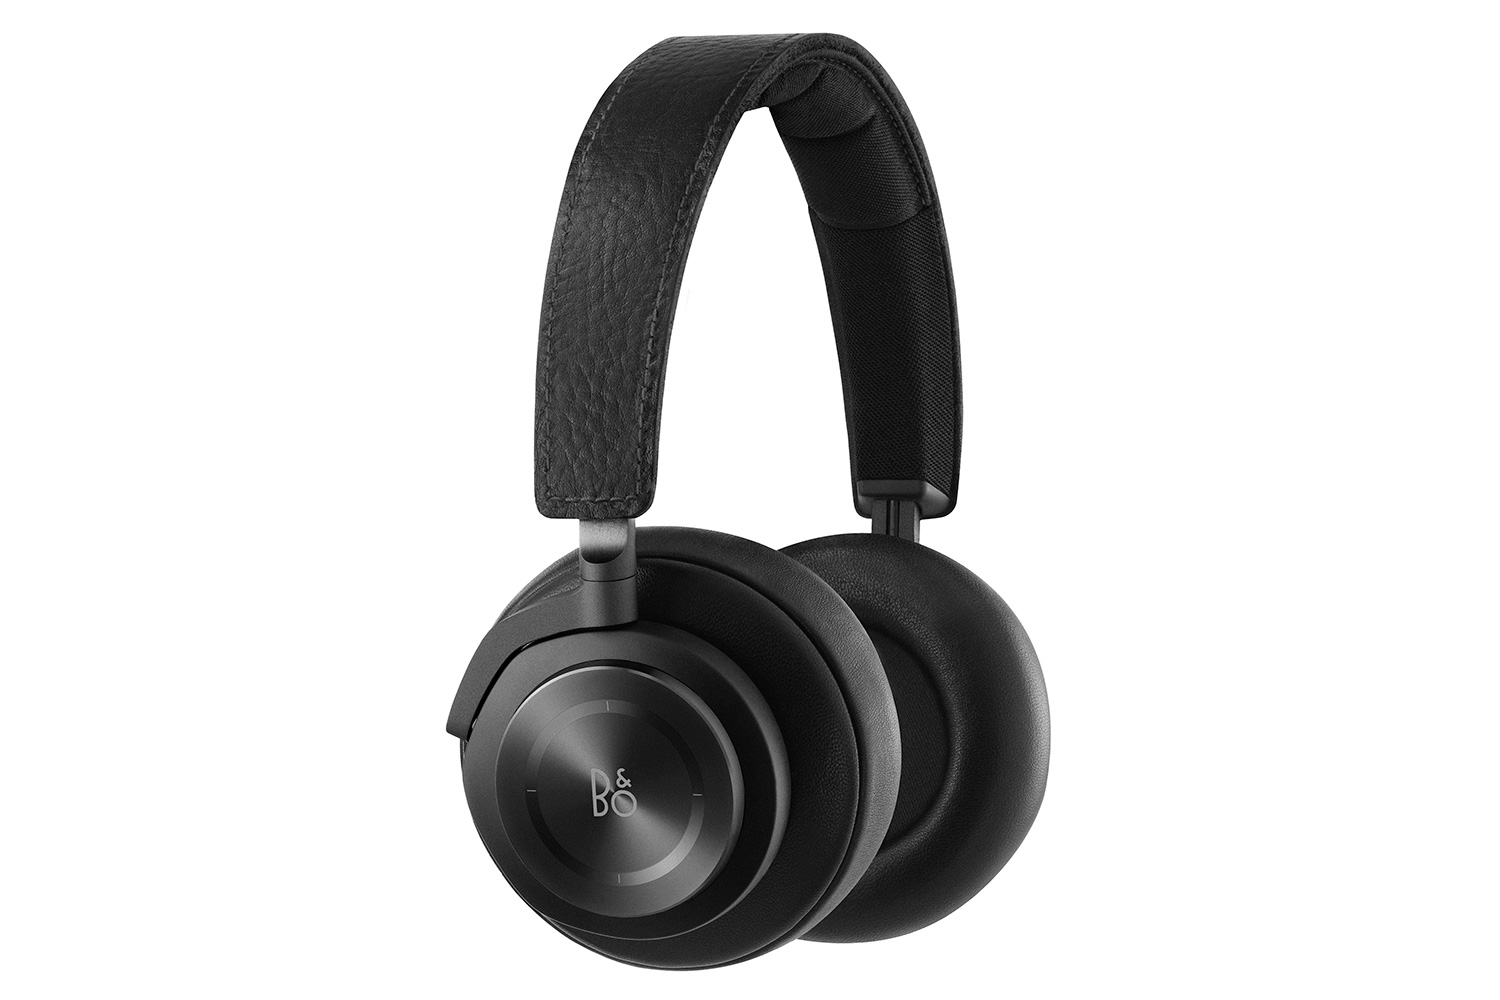 bang olufsen h7 headphones video review b o beoplay 008